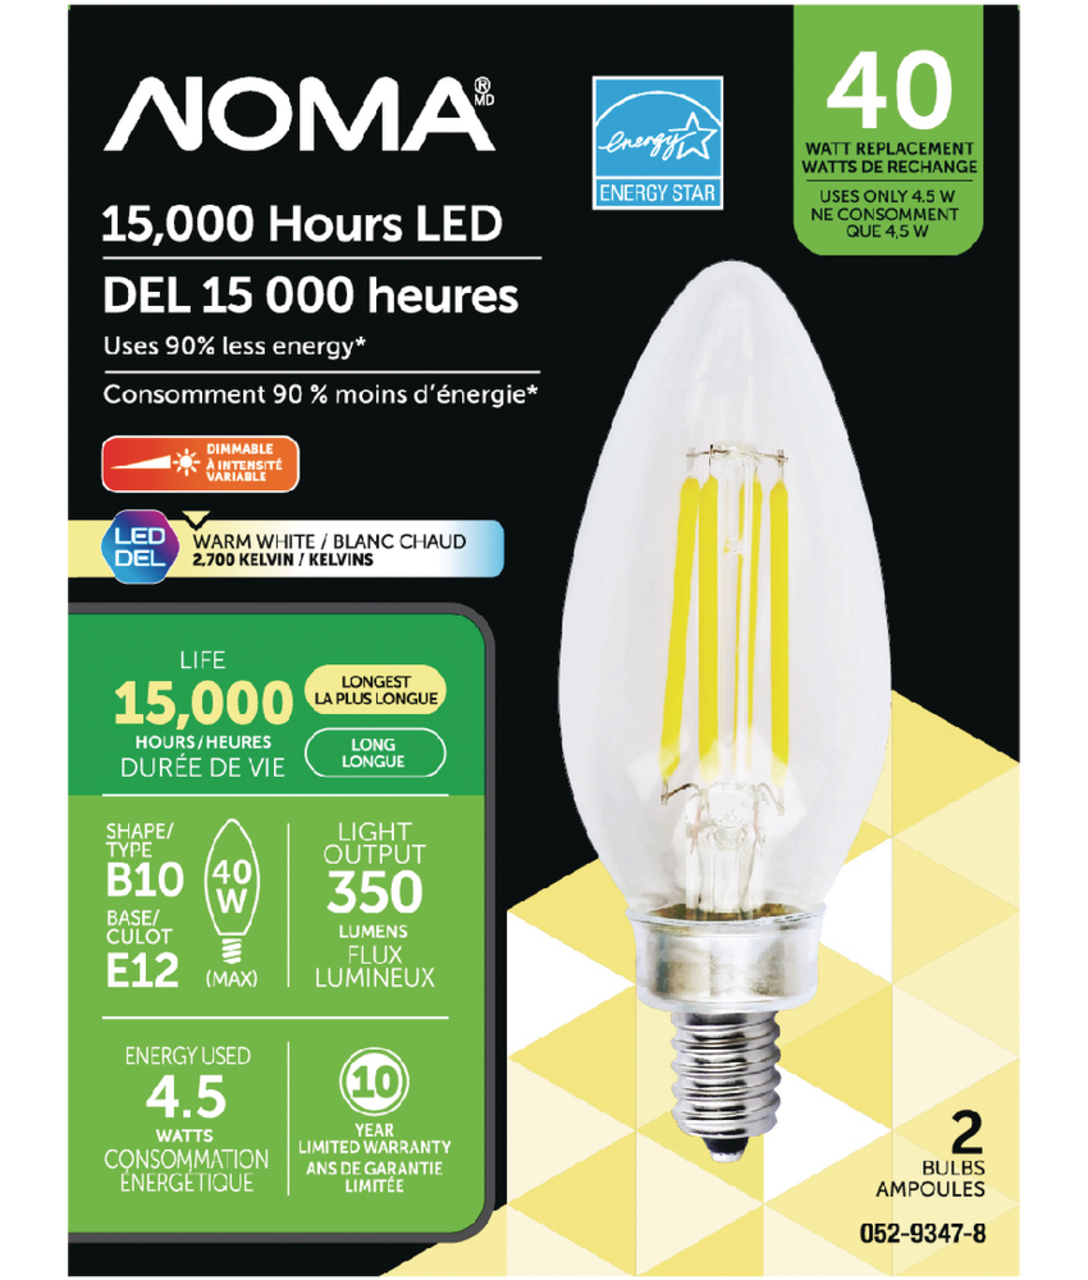 https://media-www.canadiantire.ca/product/fixing/electrical/light-bulbs/0529347/noma-2-pack-40w-e12-soft-white-led-lightbulbs-e633c18b-579c-4272-ae0f-3cad680d3e52.png?imdensity=1&imwidth=640&impolicy=mZoom